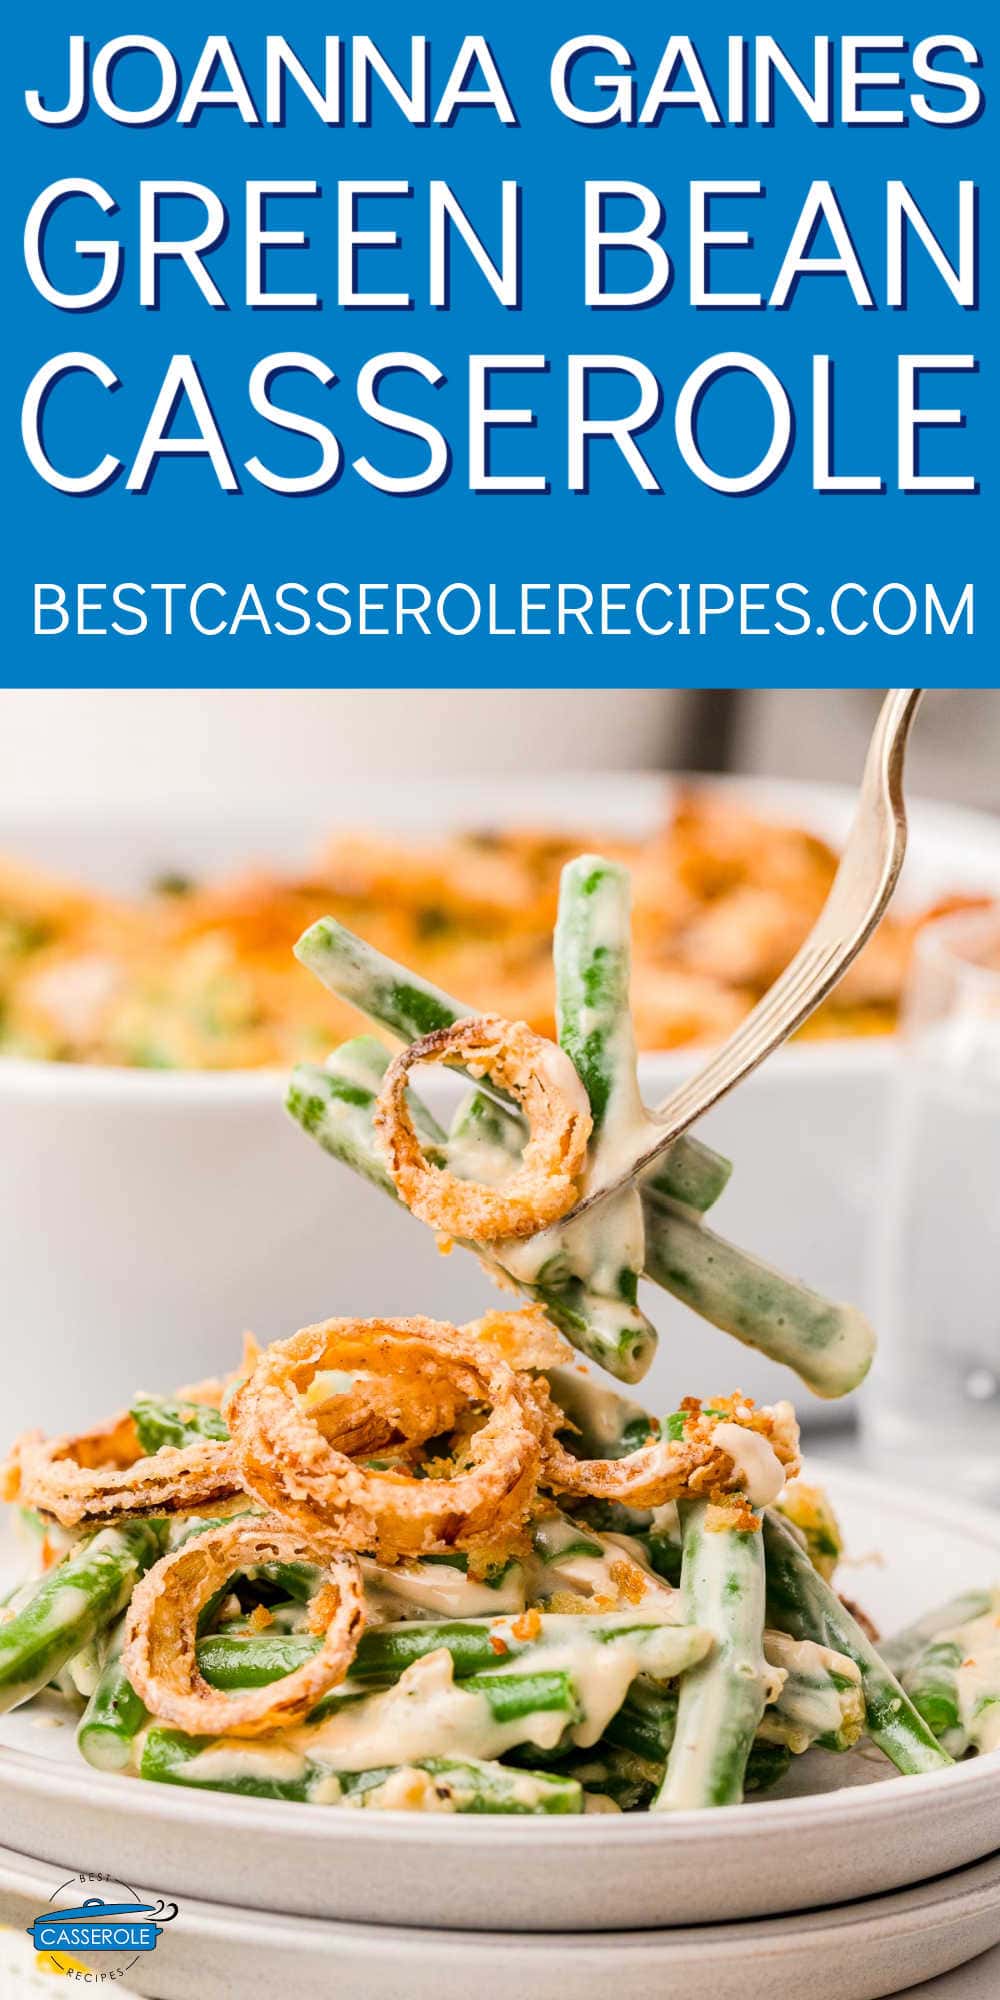 fork holding a bite of green bean casserole with blue banner and white text